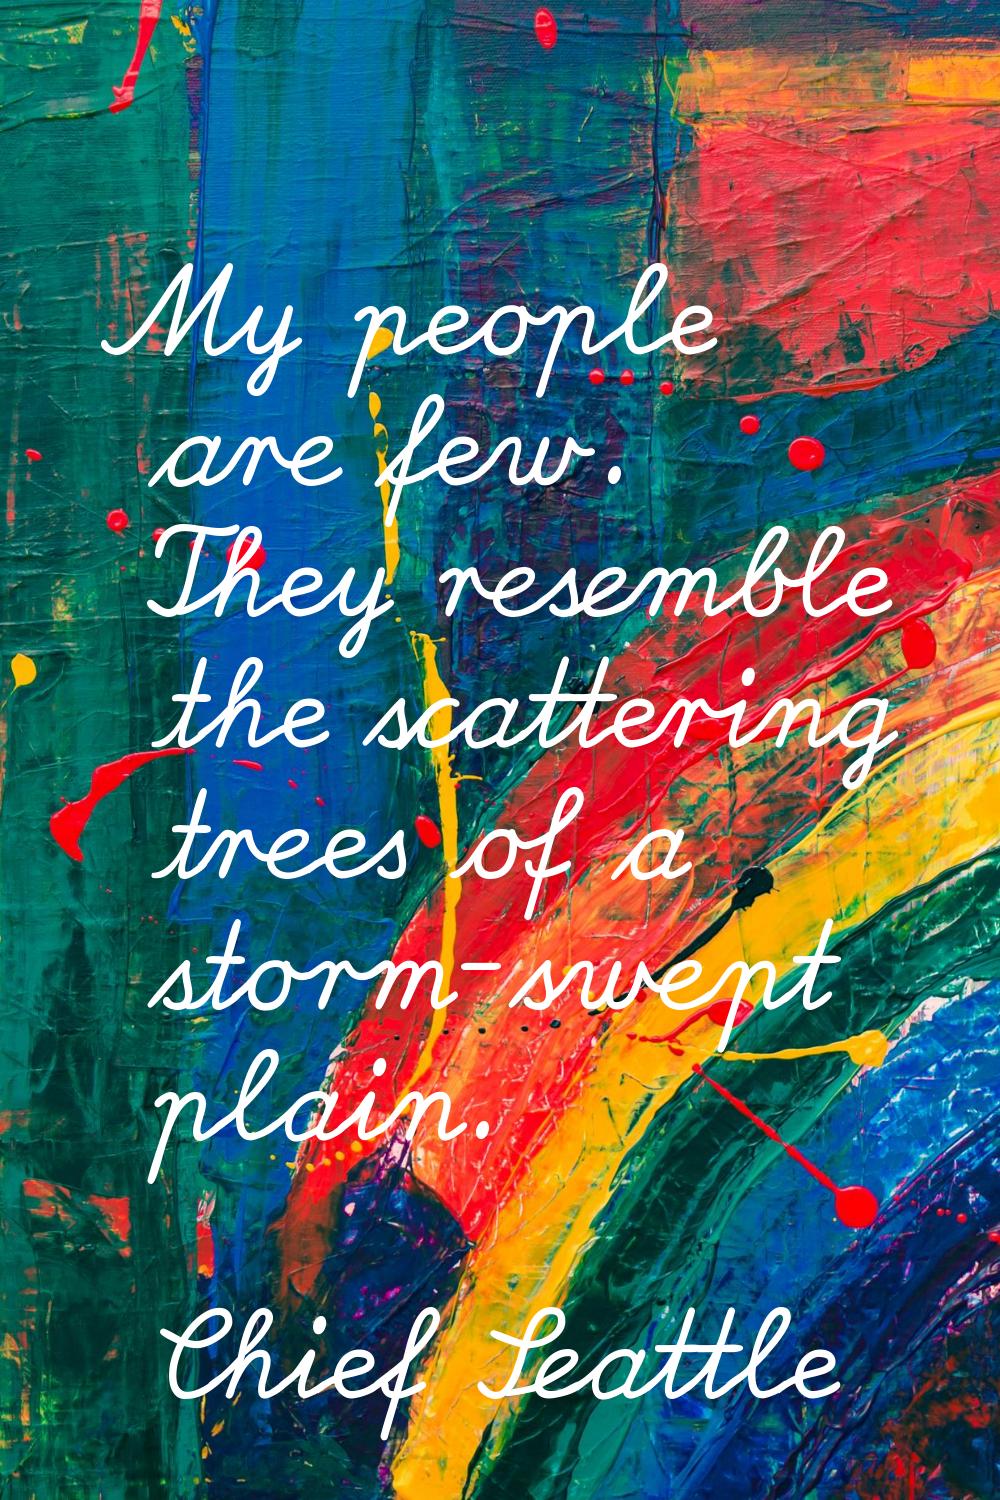 My people are few. They resemble the scattering trees of a storm-swept plain.